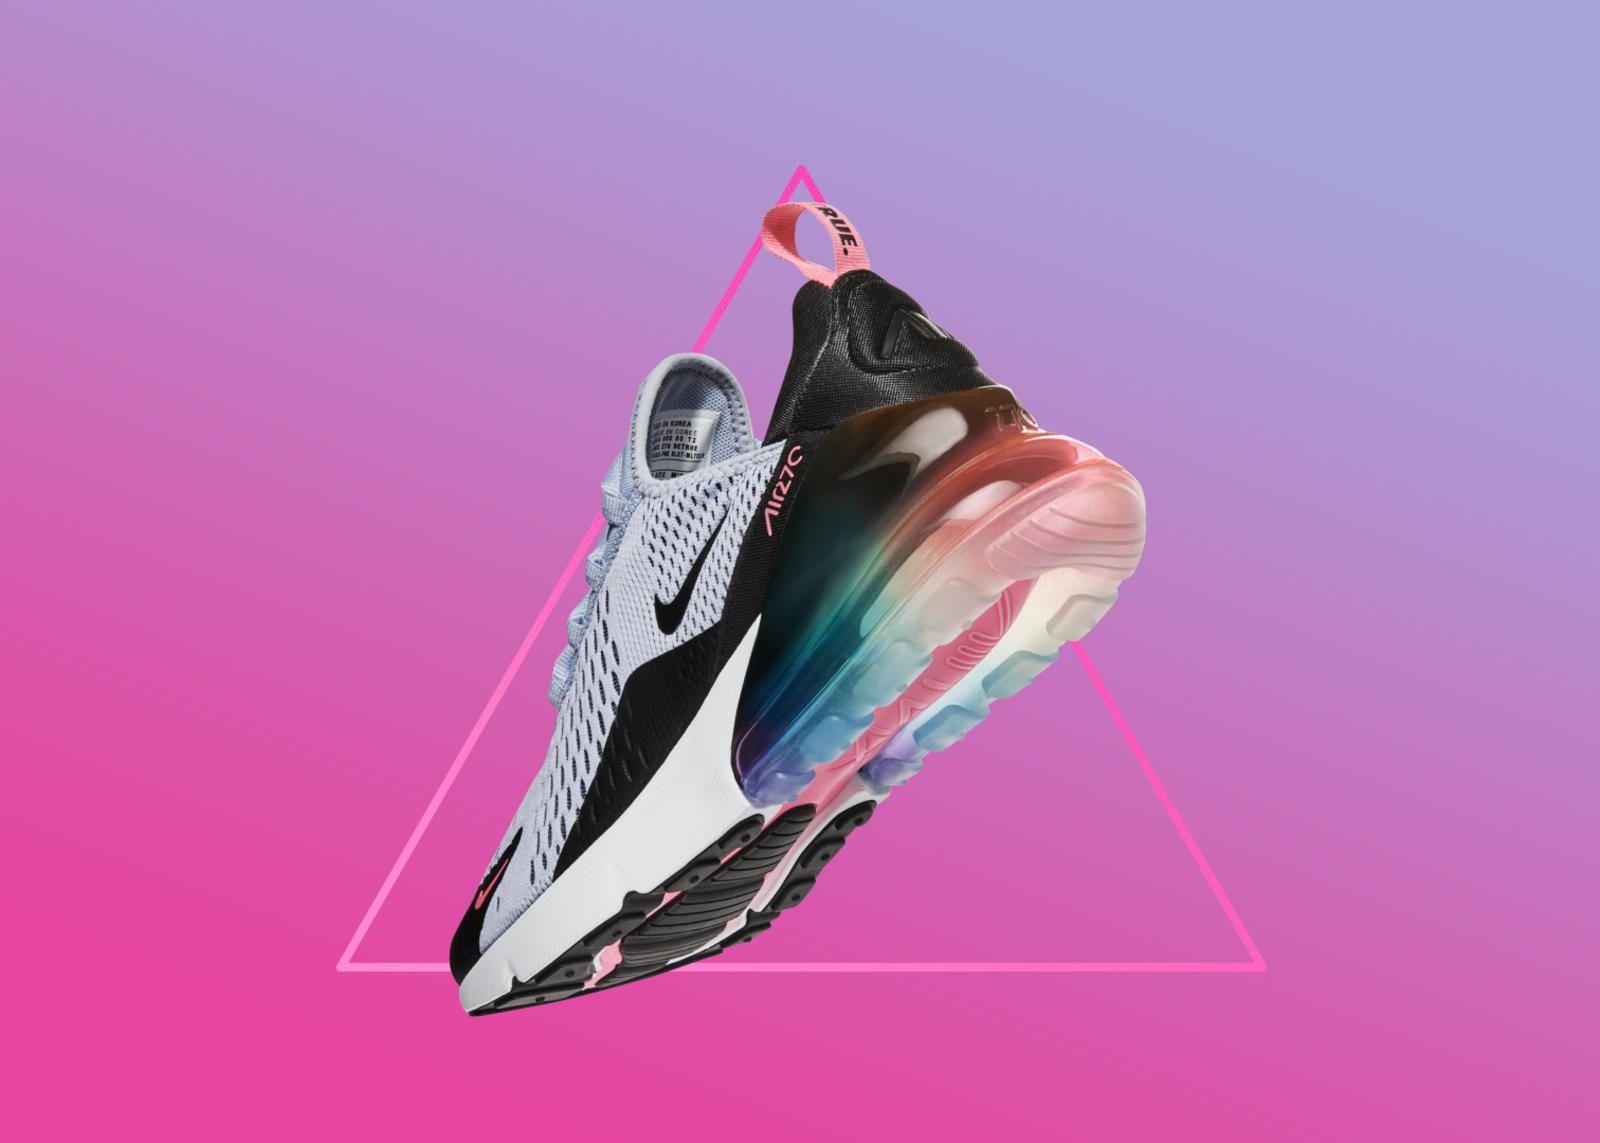 Nike Shoes with the Triangle Logo - Nike BETRUE 2018 Collection